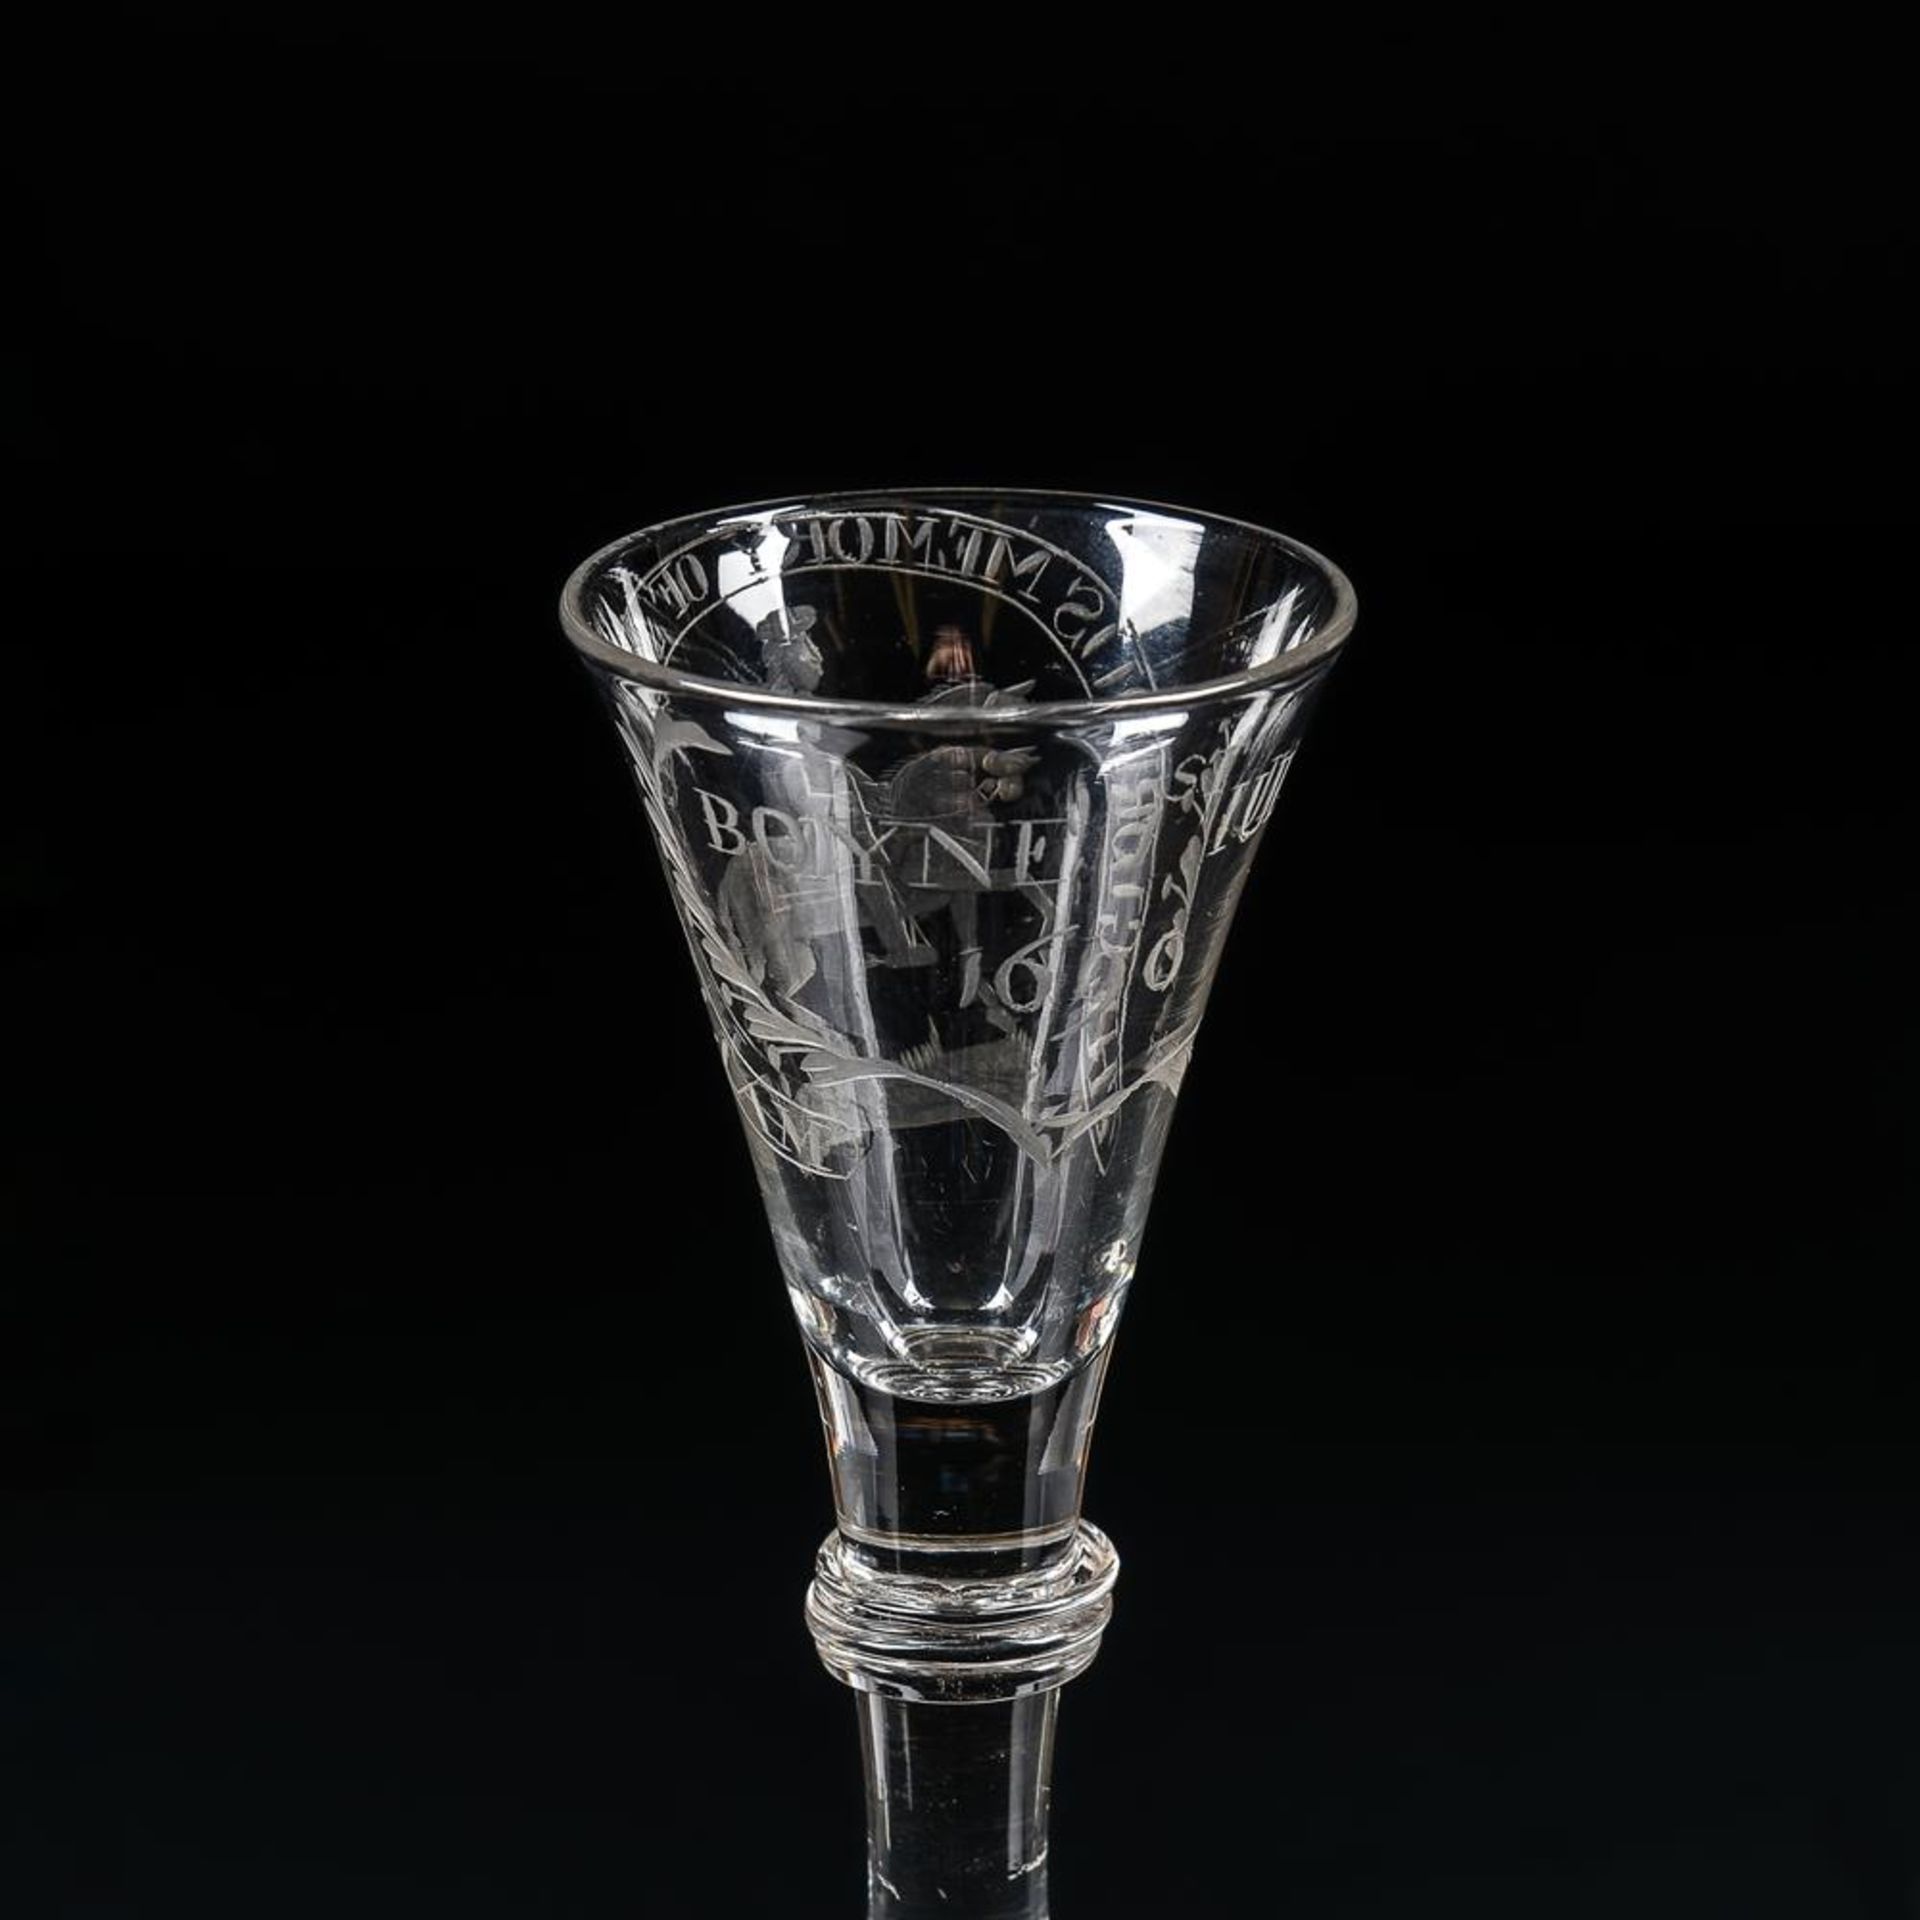 AN ENGRAVED WILLIAMITE WINE GLASS OF THE TYPE FROM THE PUGH BROTHERS STUDIOS - Image 2 of 3